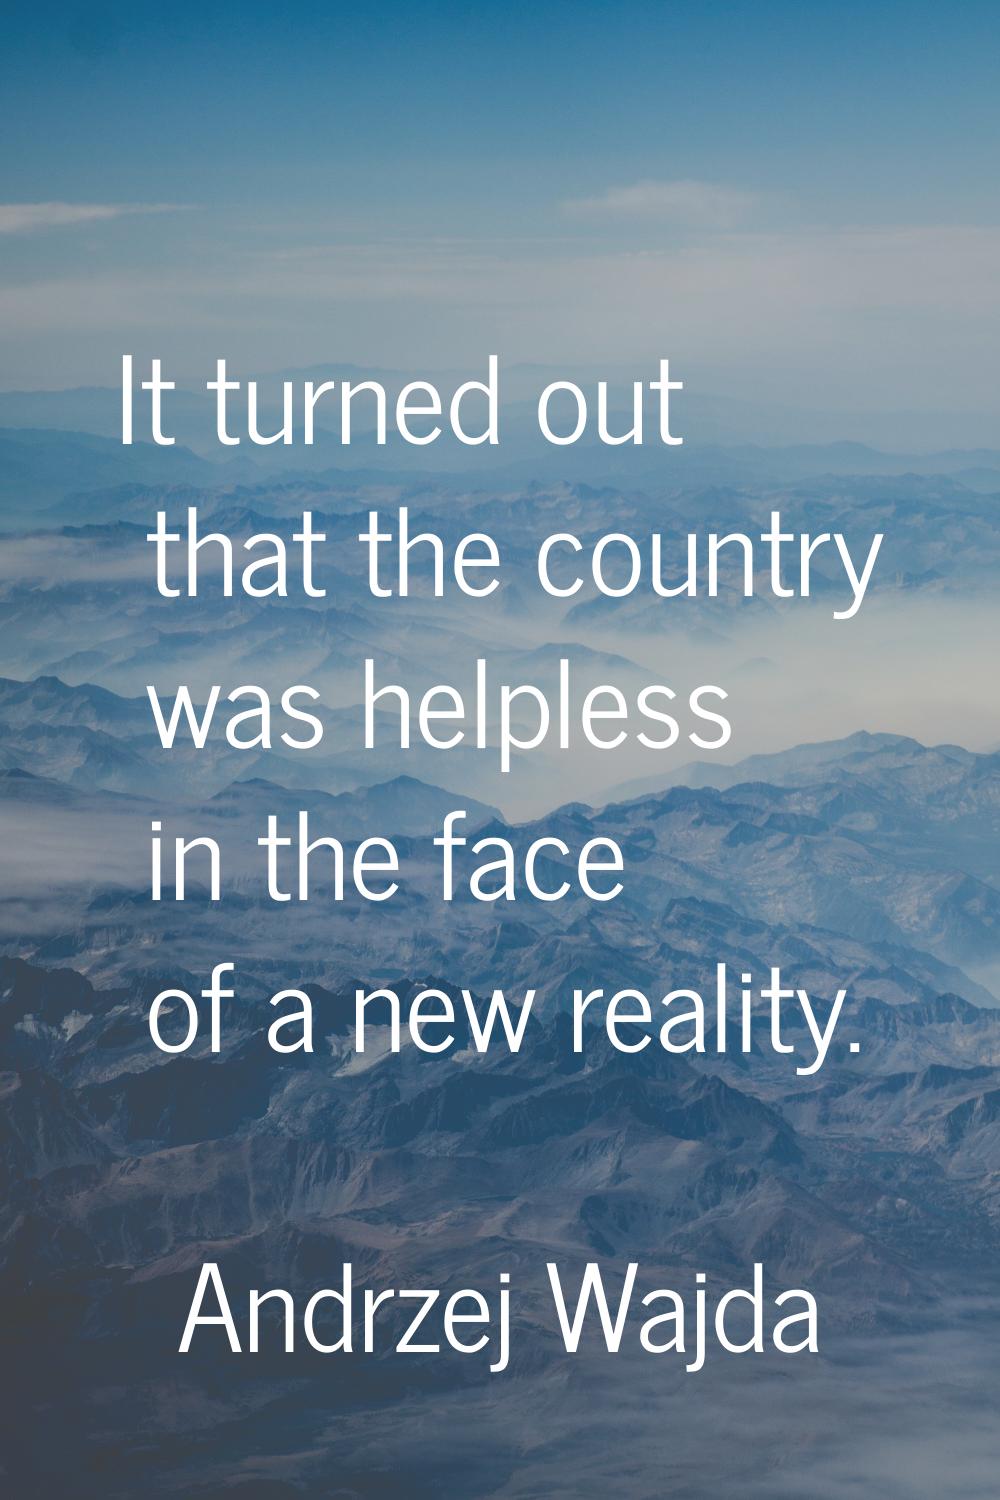 It turned out that the country was helpless in the face of a new reality.